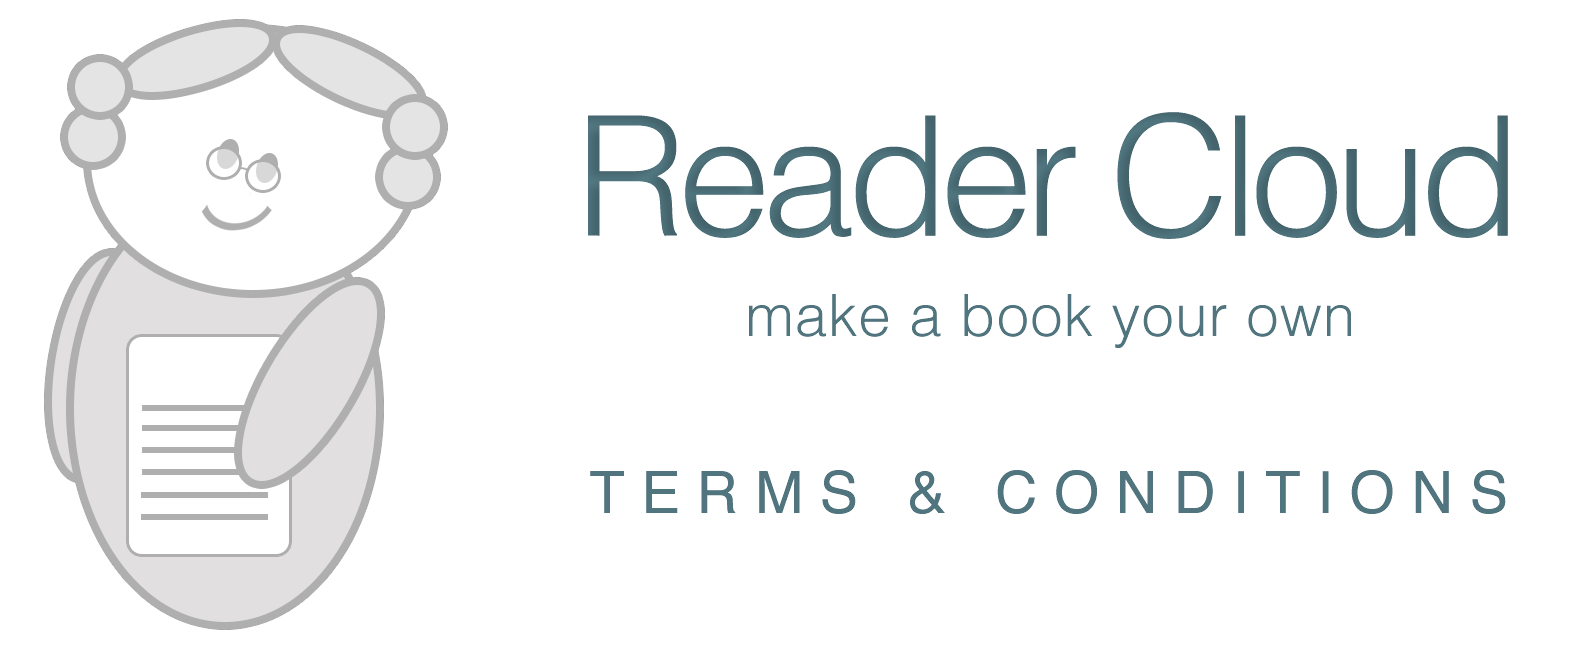 Reader Cloud Terms and Conditions